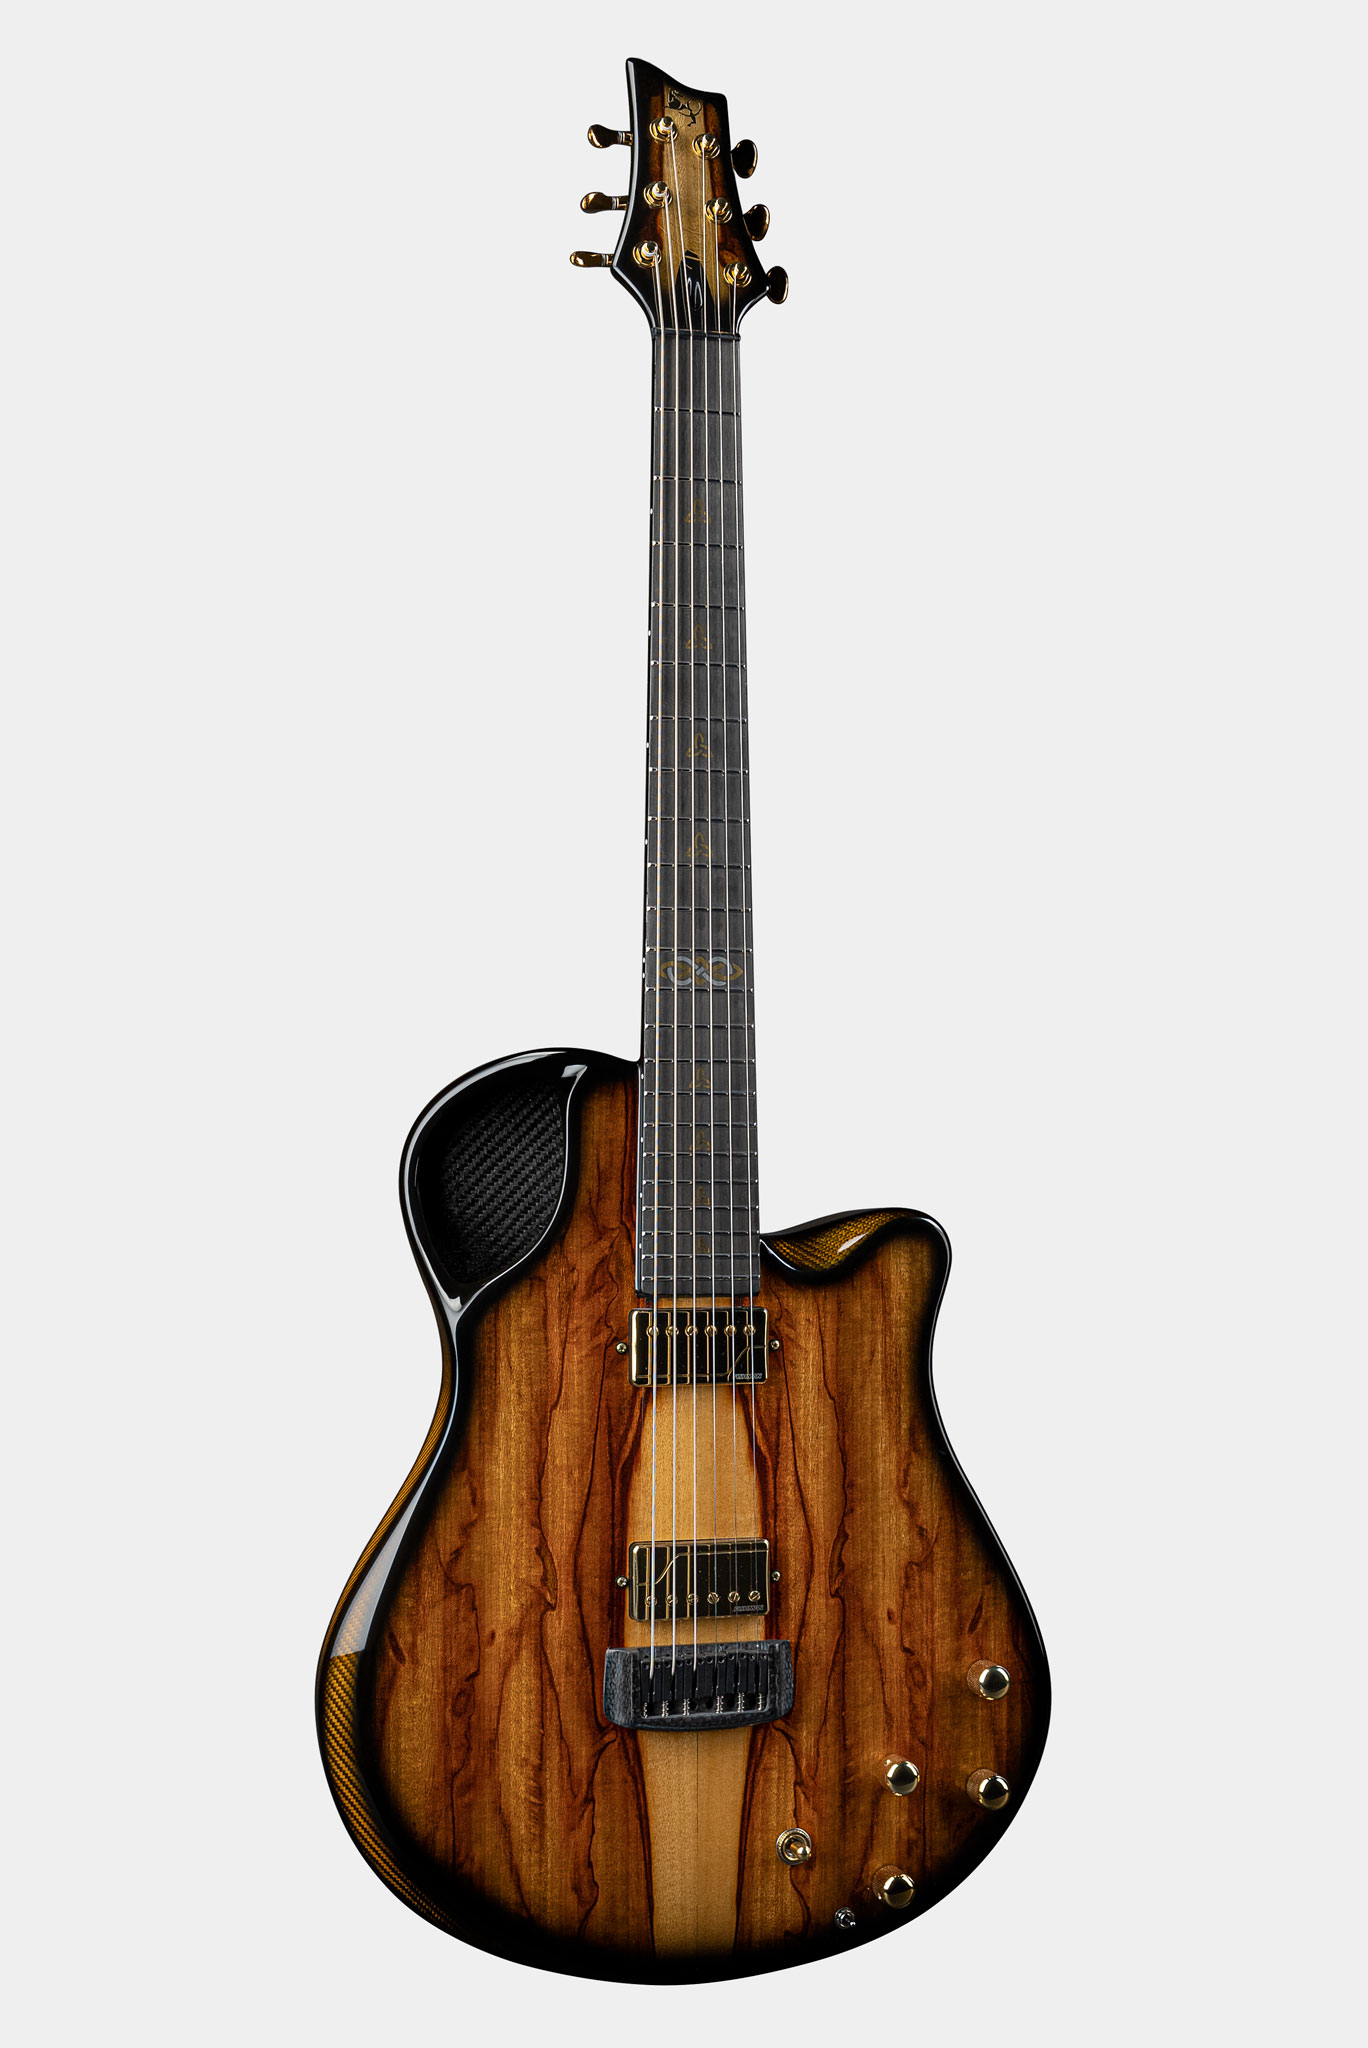 Virtuo Guitar with Spalted Design